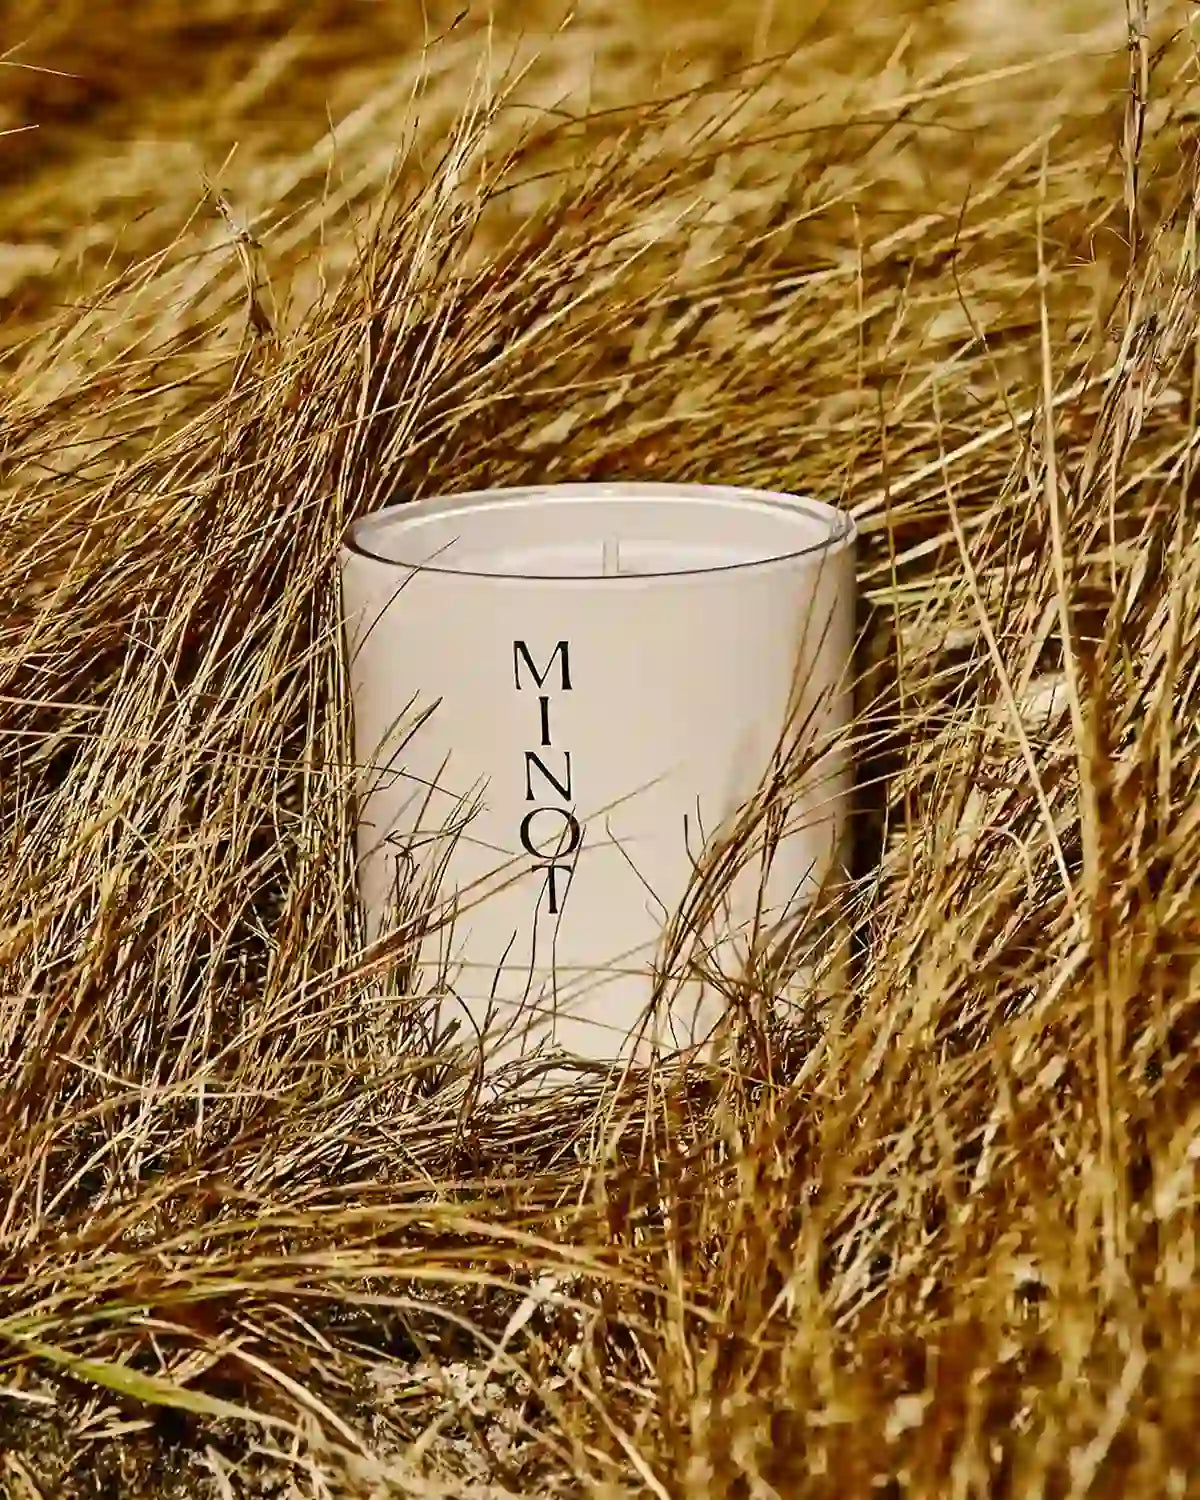 The Wild Meadow candle, surrounded by tan grasses, offers floral notes of lilac and honeysuckle